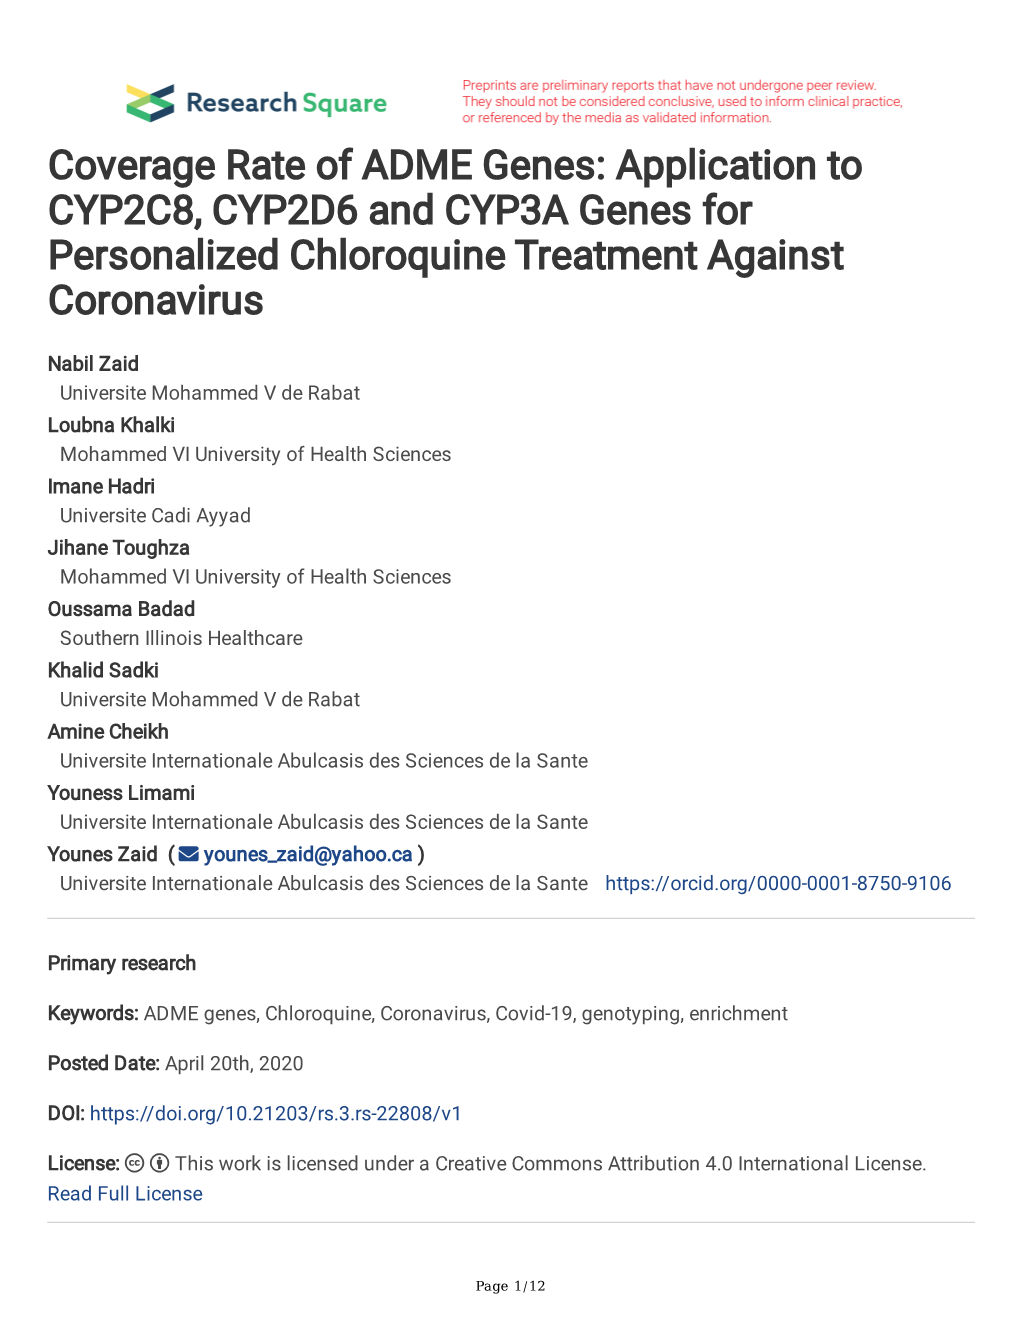 Coverage Rate of ADME Genes: Application to CYP2C8, CYP2D6 and CYP3A Genes for Personalized Chloroquine Treatment Against Coronavirus